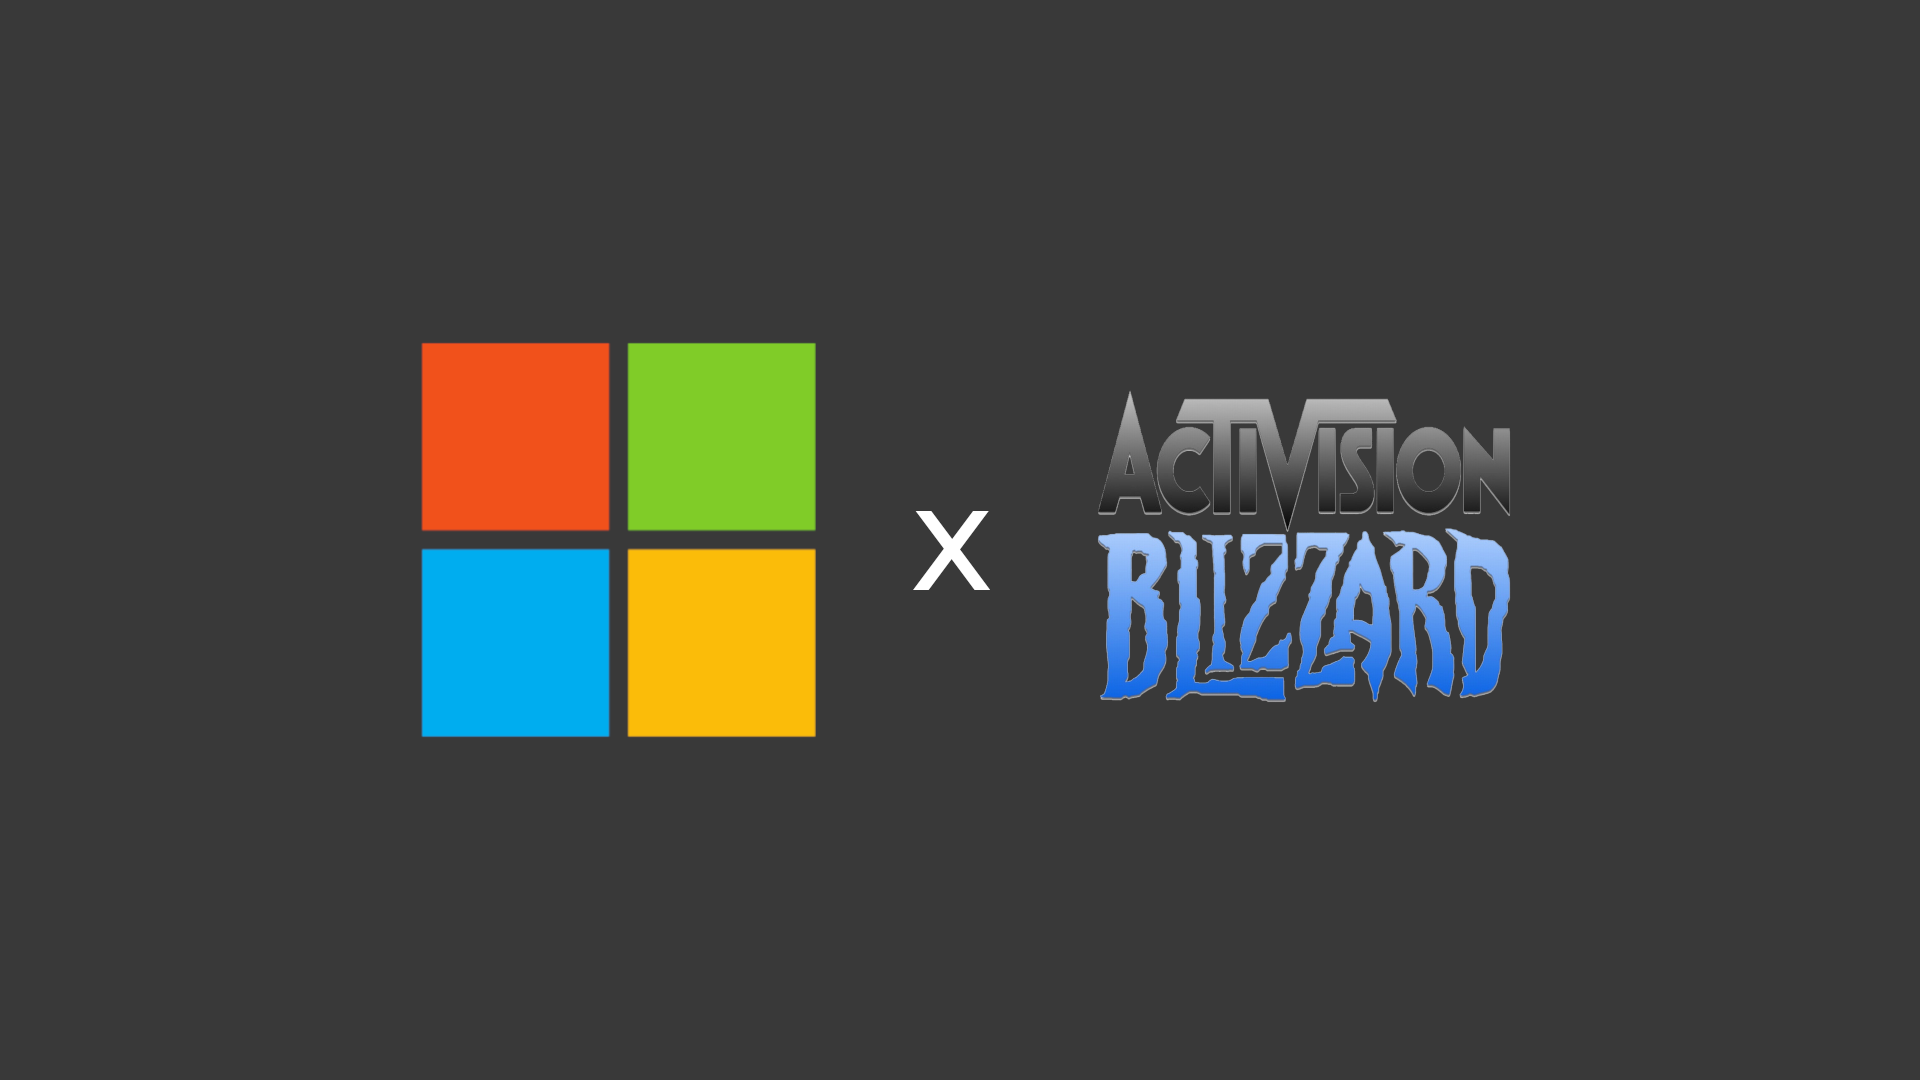  After the acquisition, Activision Blizzard will continue to exist as a subsidiary of Microsoft. Photo by Josh Levin.